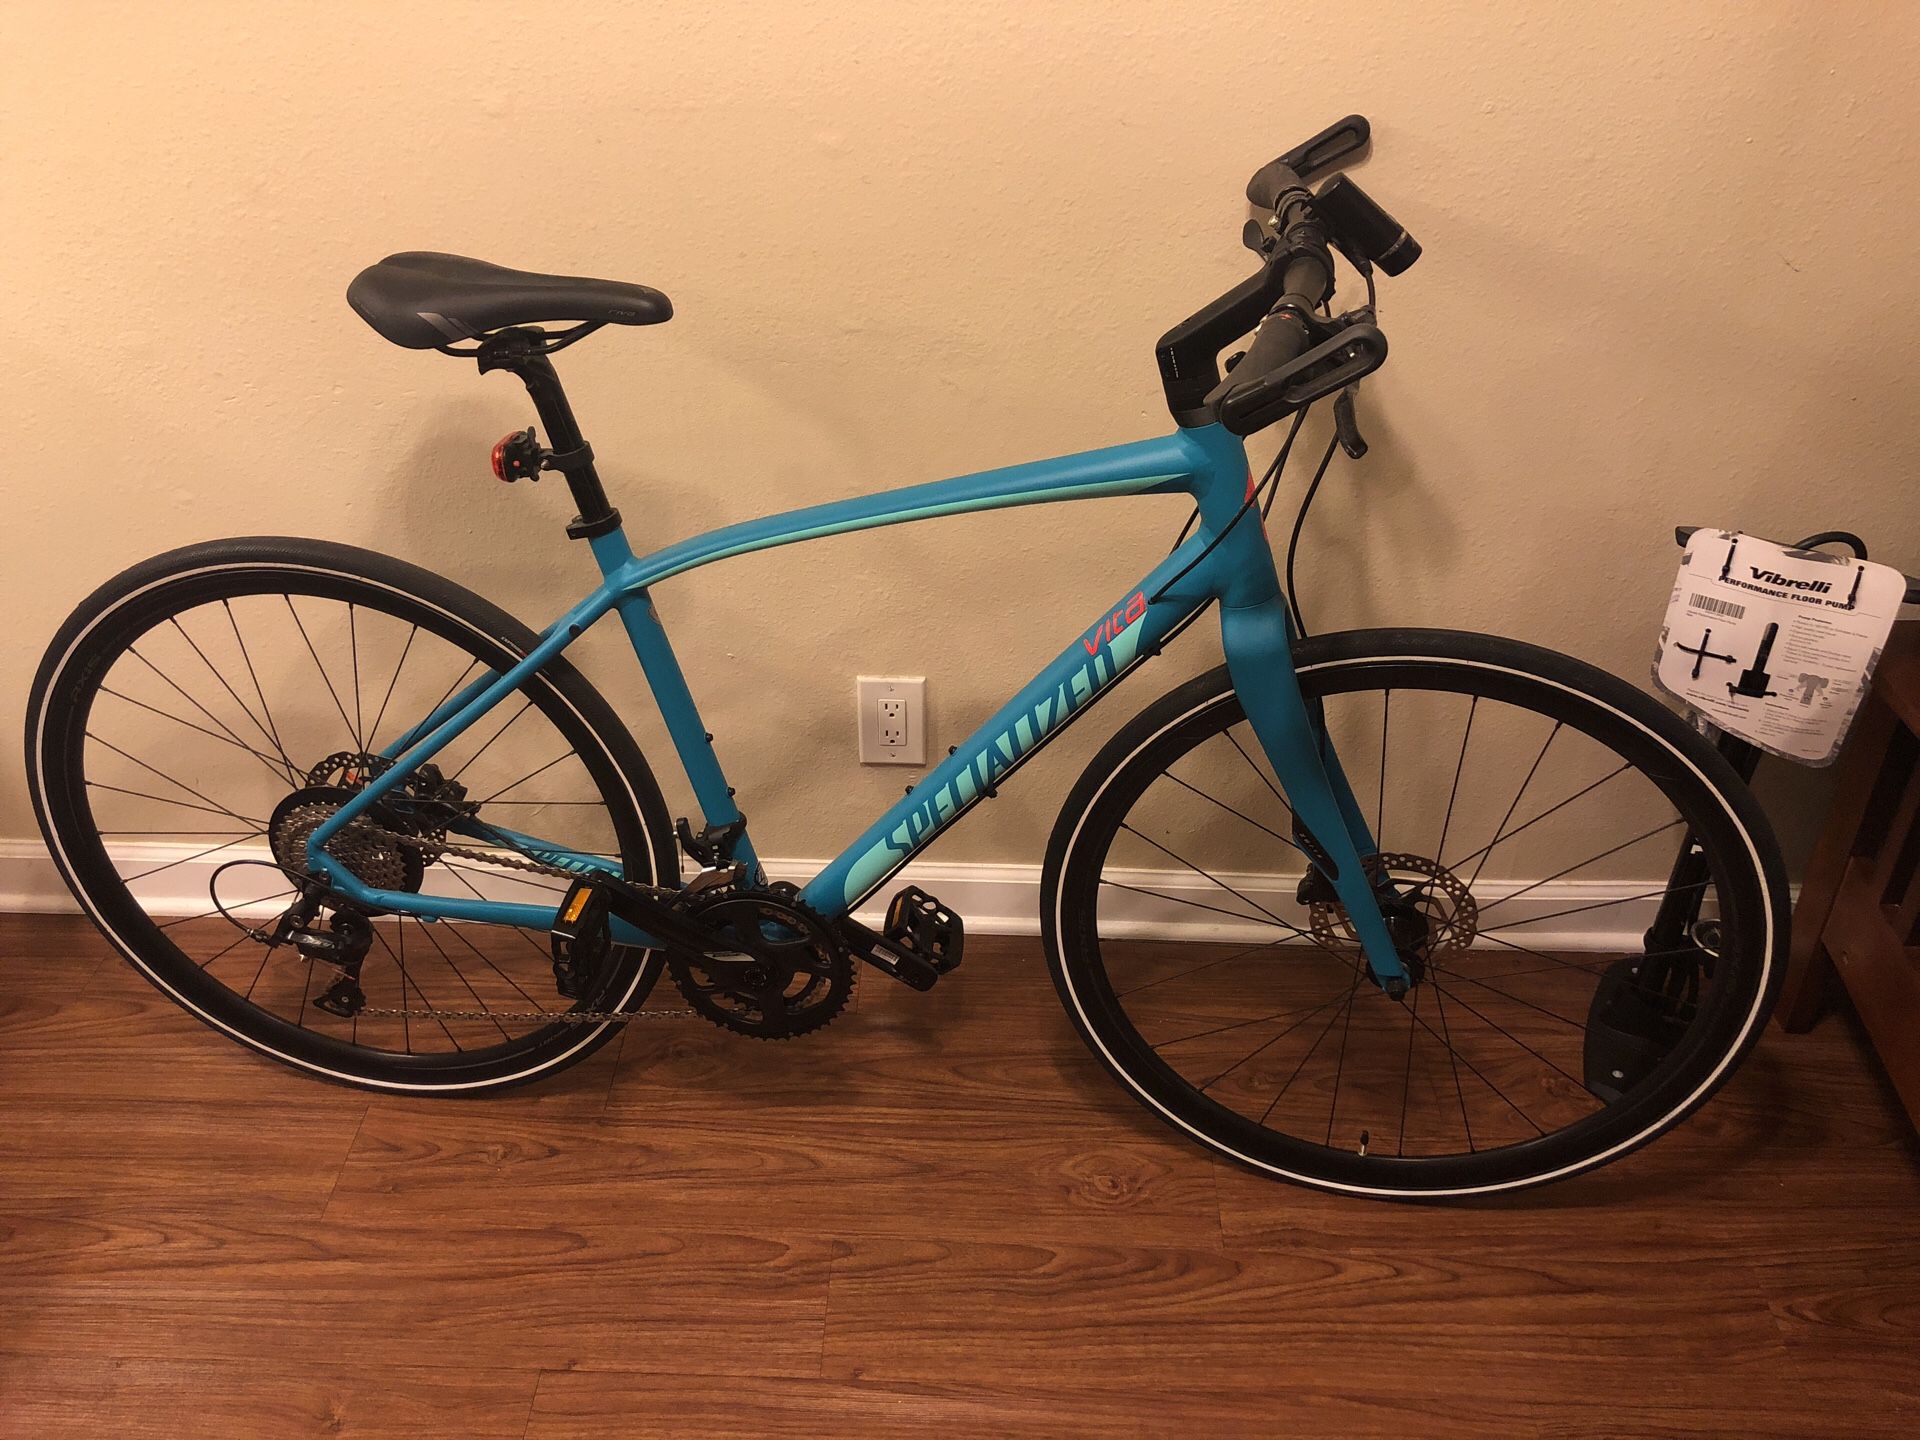 New Specialized large Vita Elite Turquoise Bike with brand new floor pump